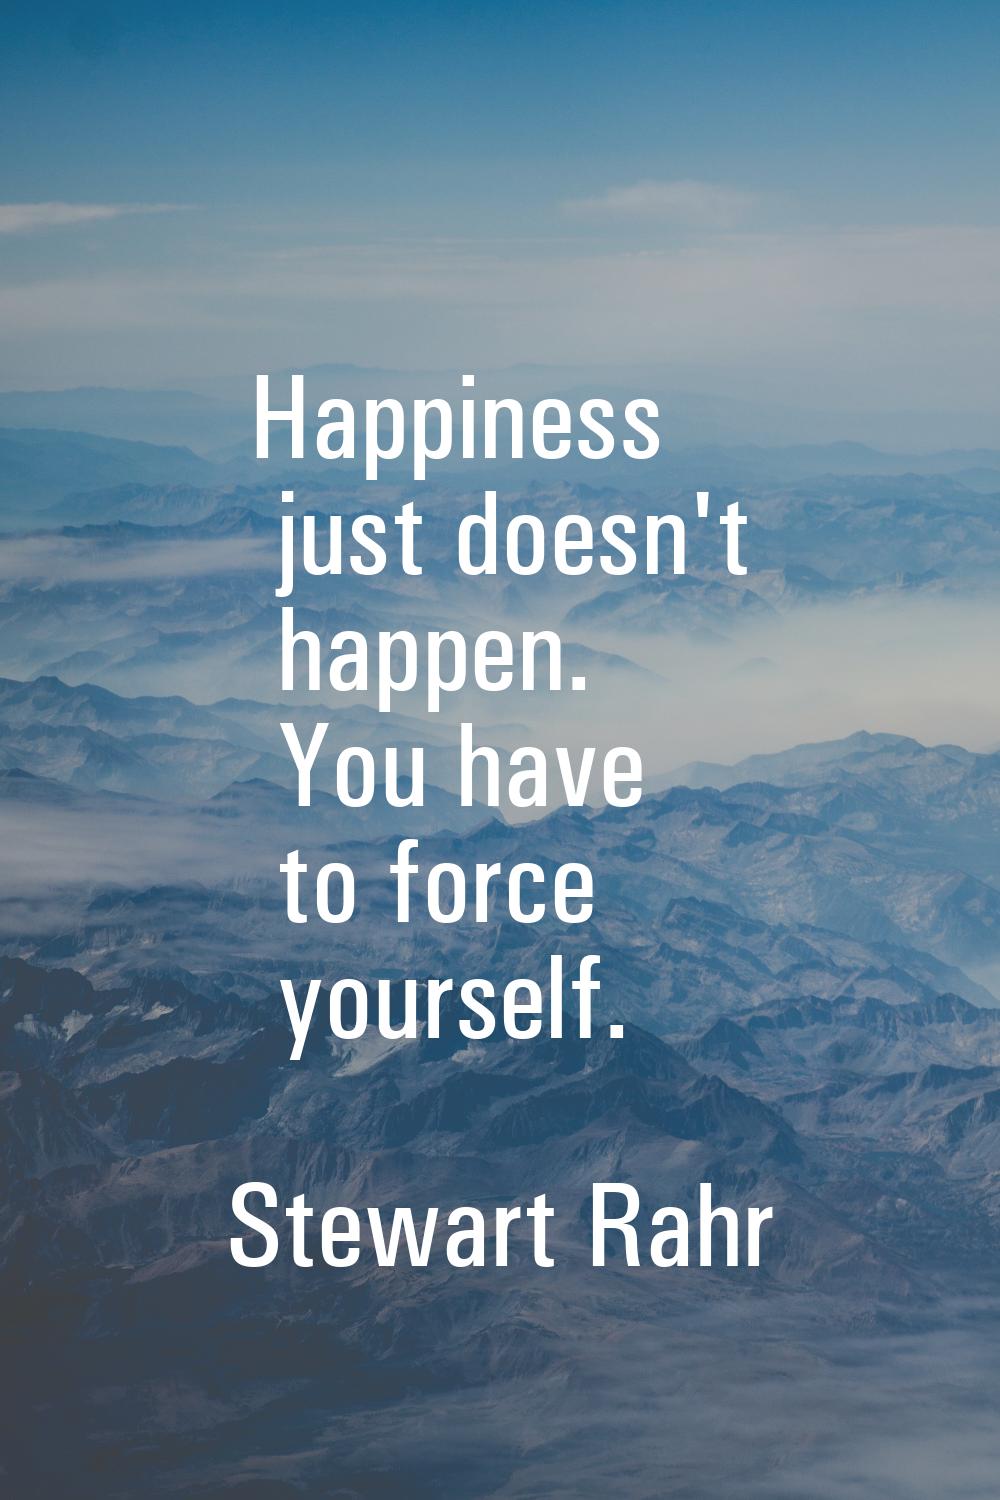 Happiness just doesn't happen. You have to force yourself.